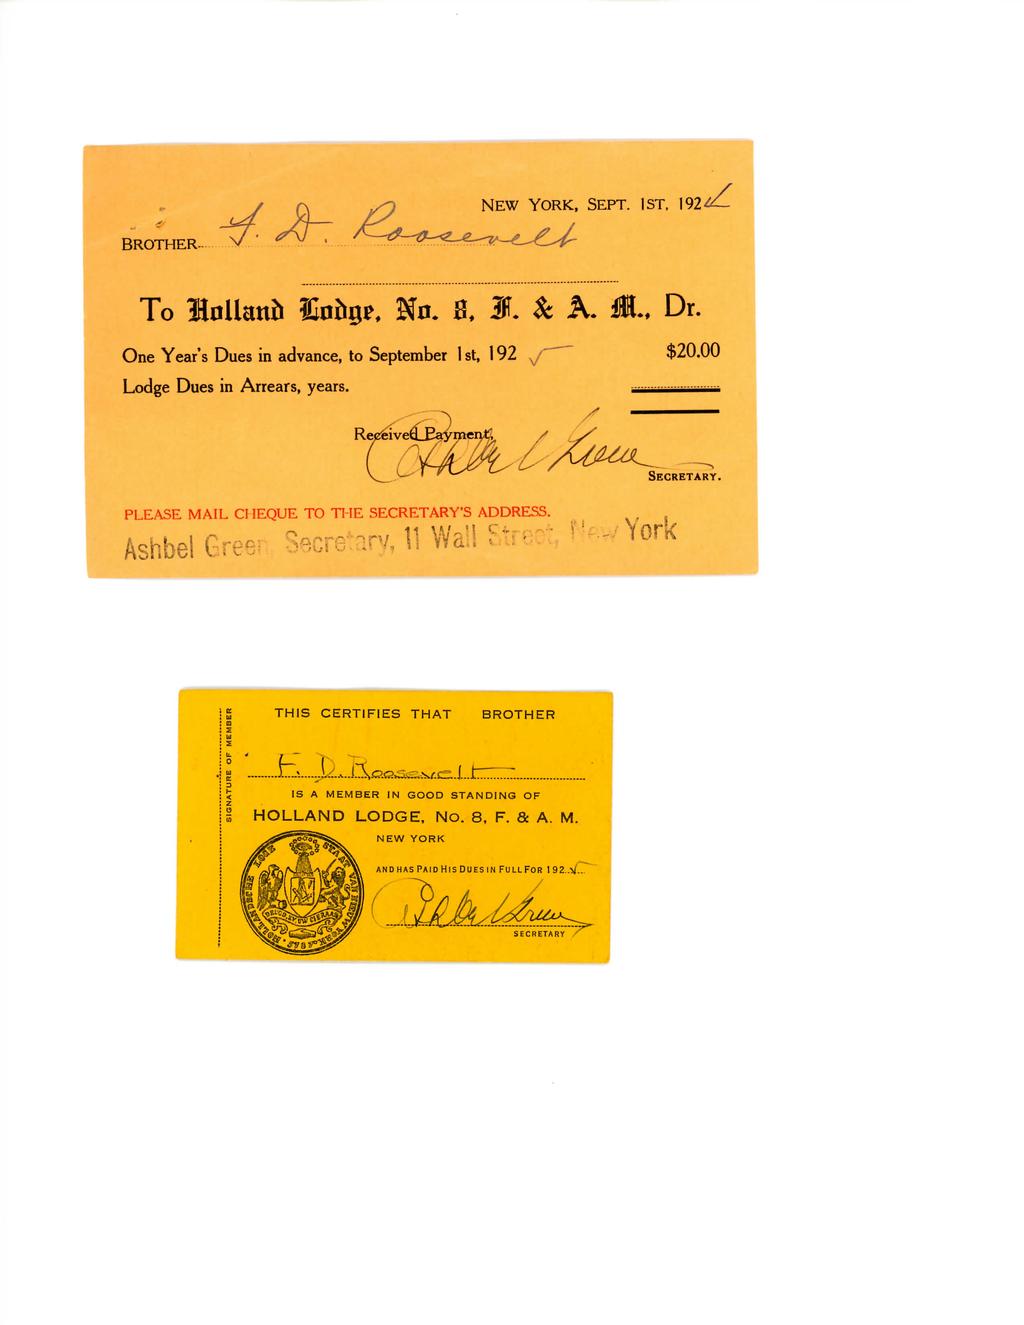 BROTHER- To, No. B, L & A. One Year's Dues in advance, to September 1 st, 1 92.. Dr. $20.00 Lodge Dues in Arrears, years. SECRETARY. PLEASE MAIL CI IEQUE TO THE SECRETARY'S ADDRESS.